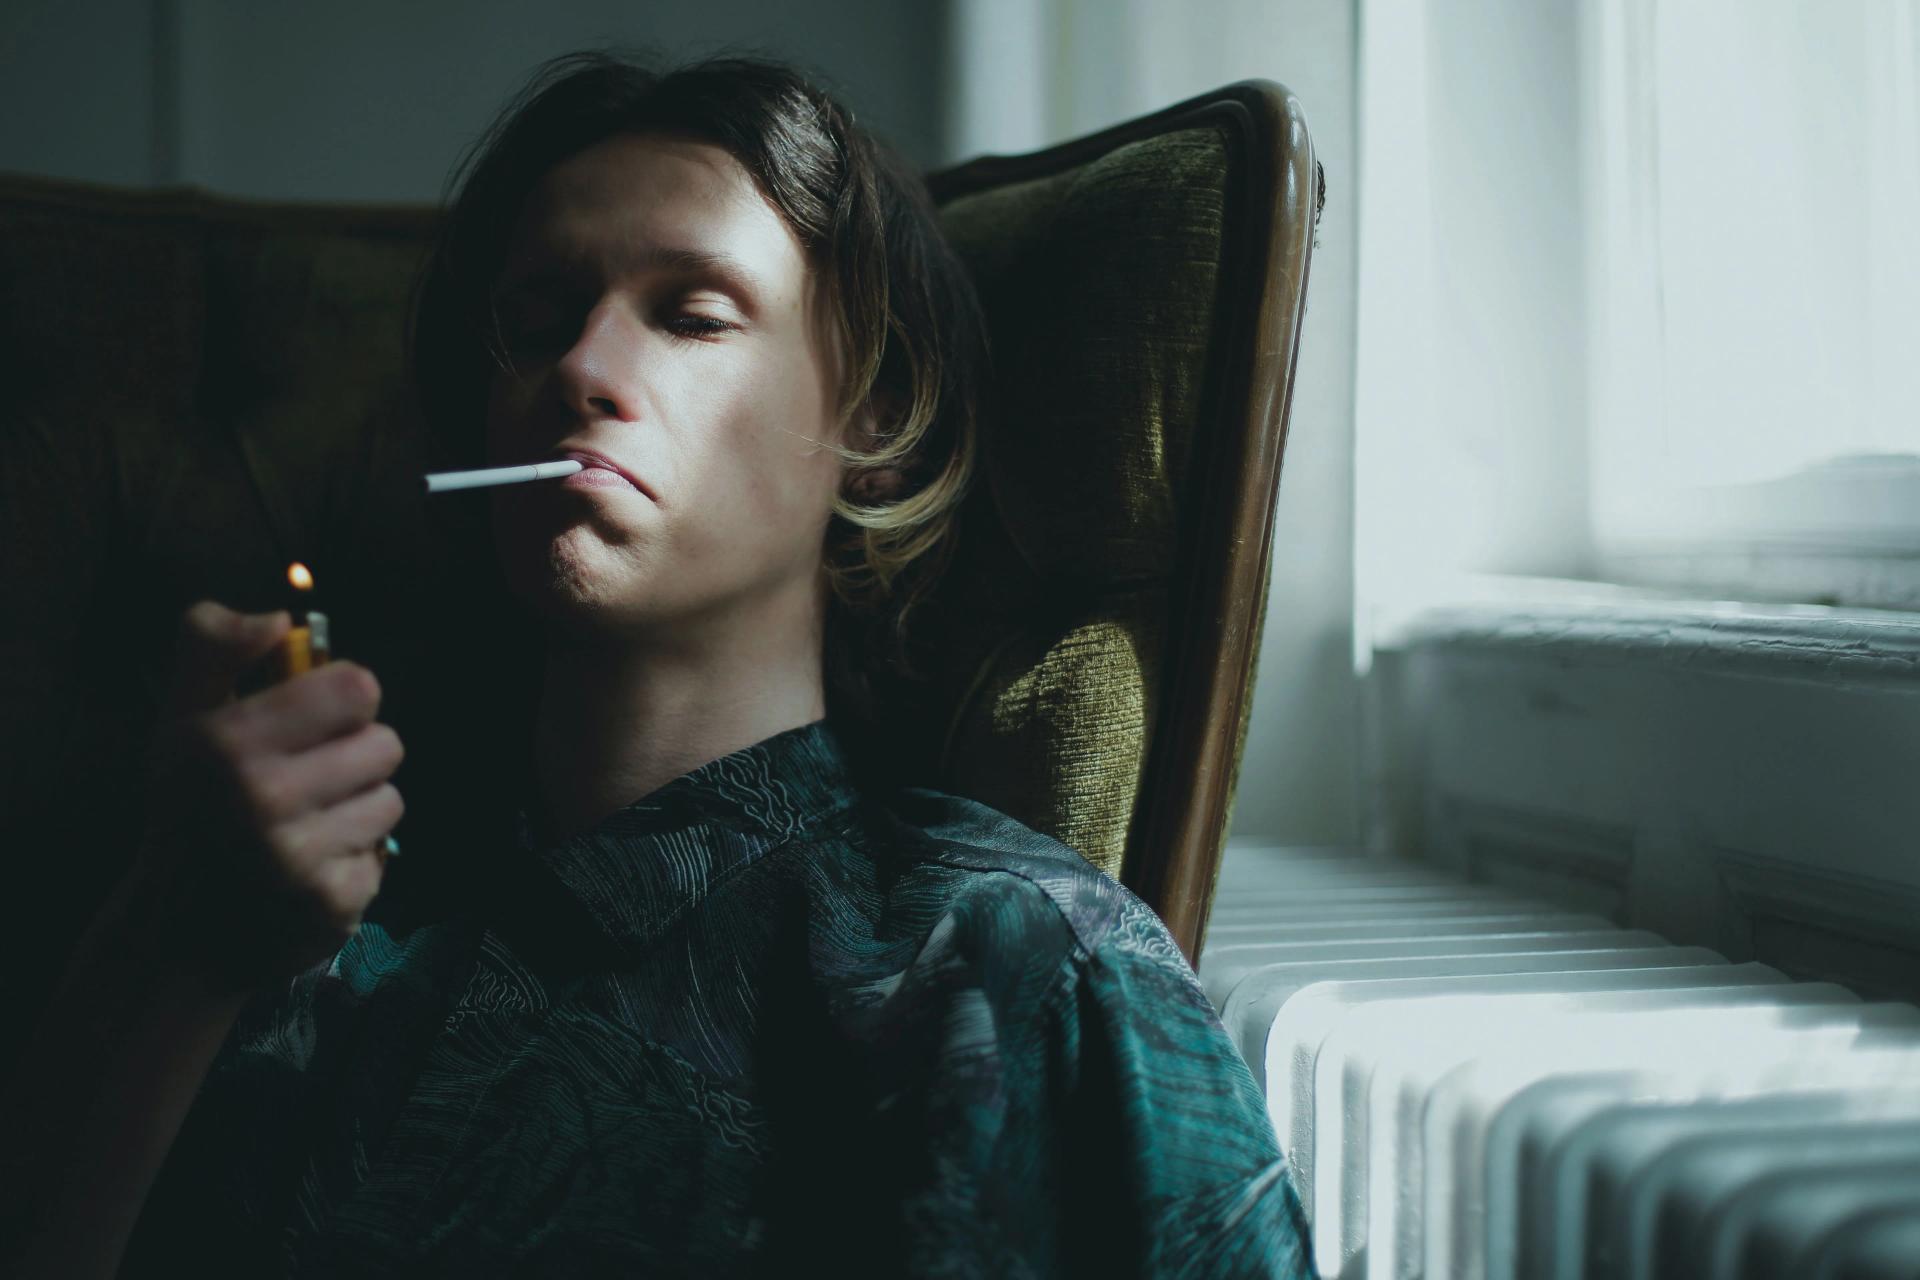 A Man Smoking in his Room